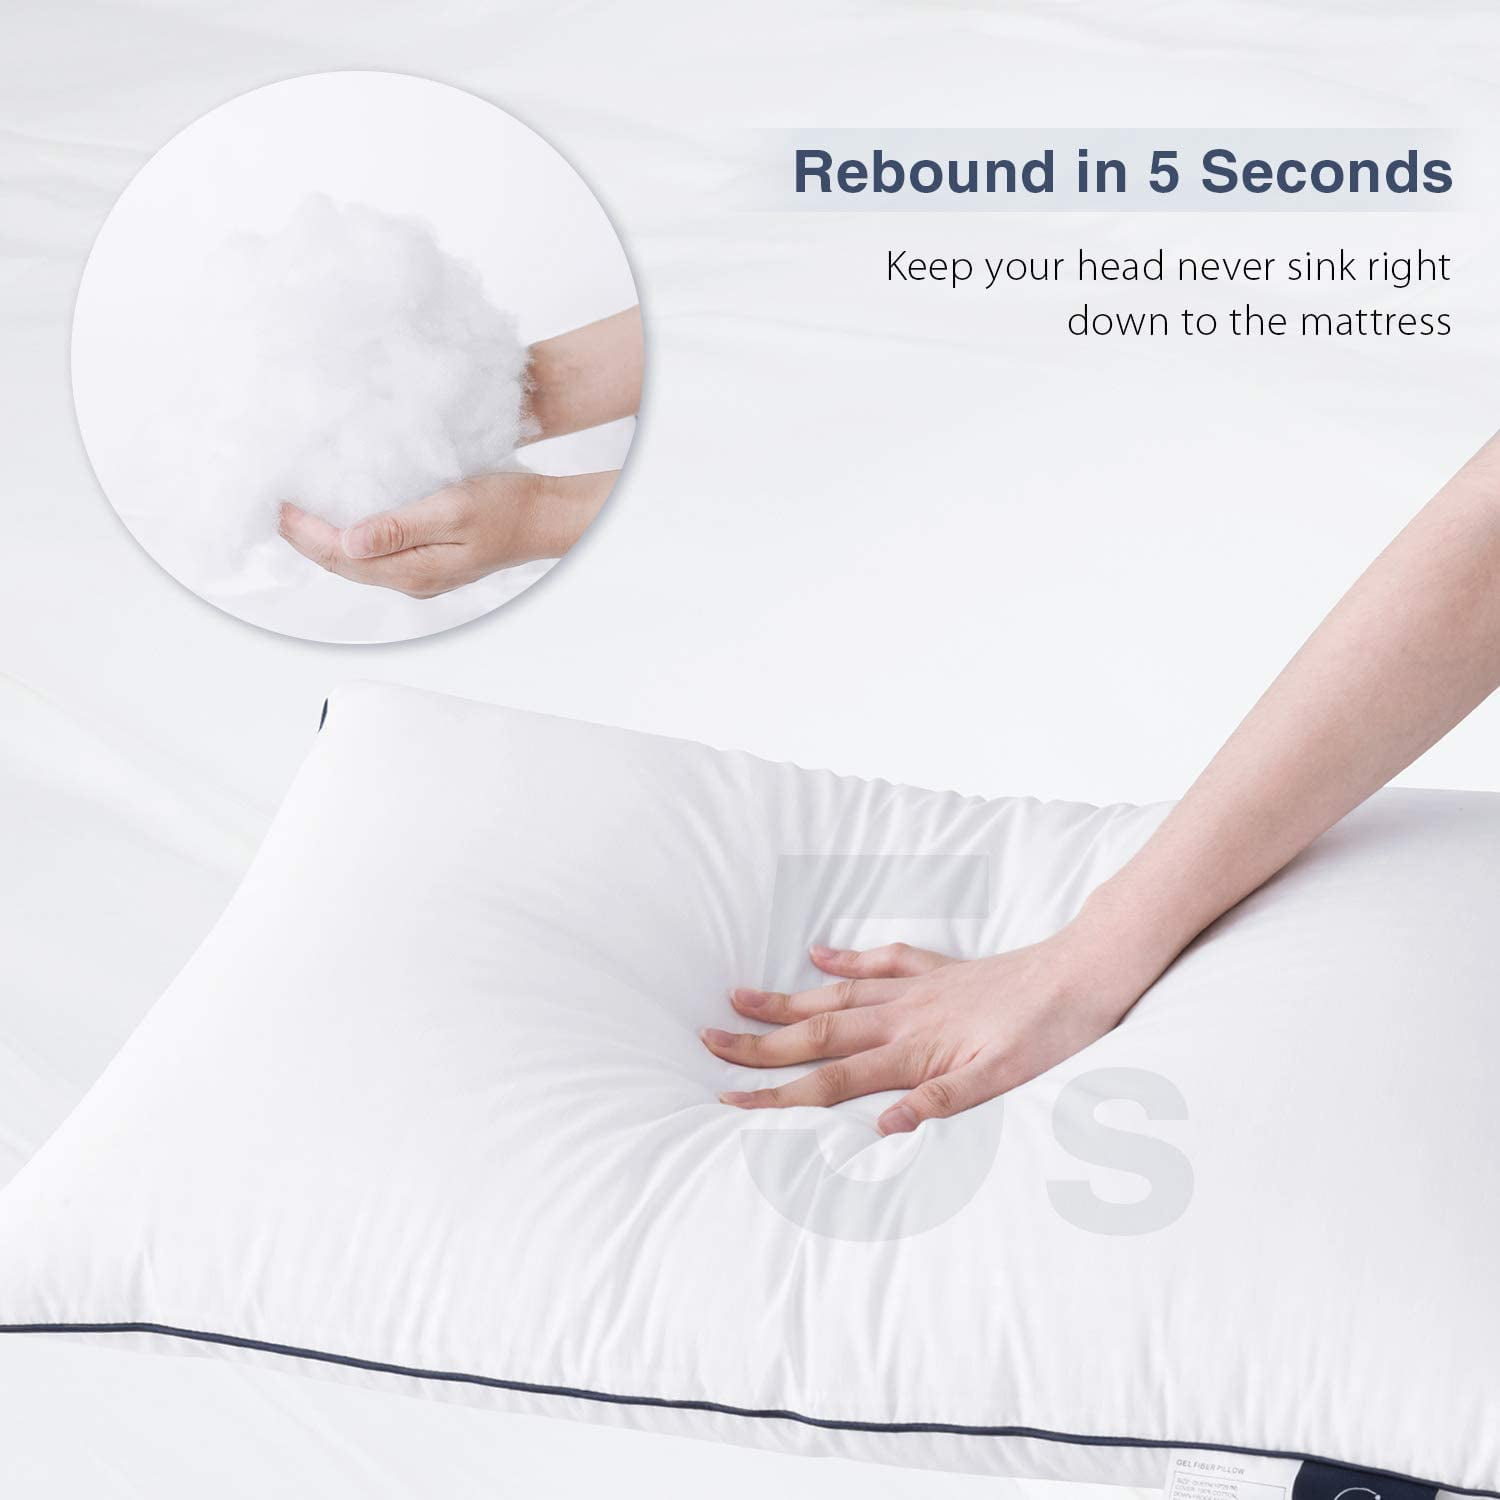 Hypoallergenic Pillow for Side and Back Sleeper N//C Bed Pillows for Sleeping 2 Pack Queen Size 20 x 30 Inches Soft Hotel Collection Gel Pillows Set of 2 Down Alternative Cooling Pillow